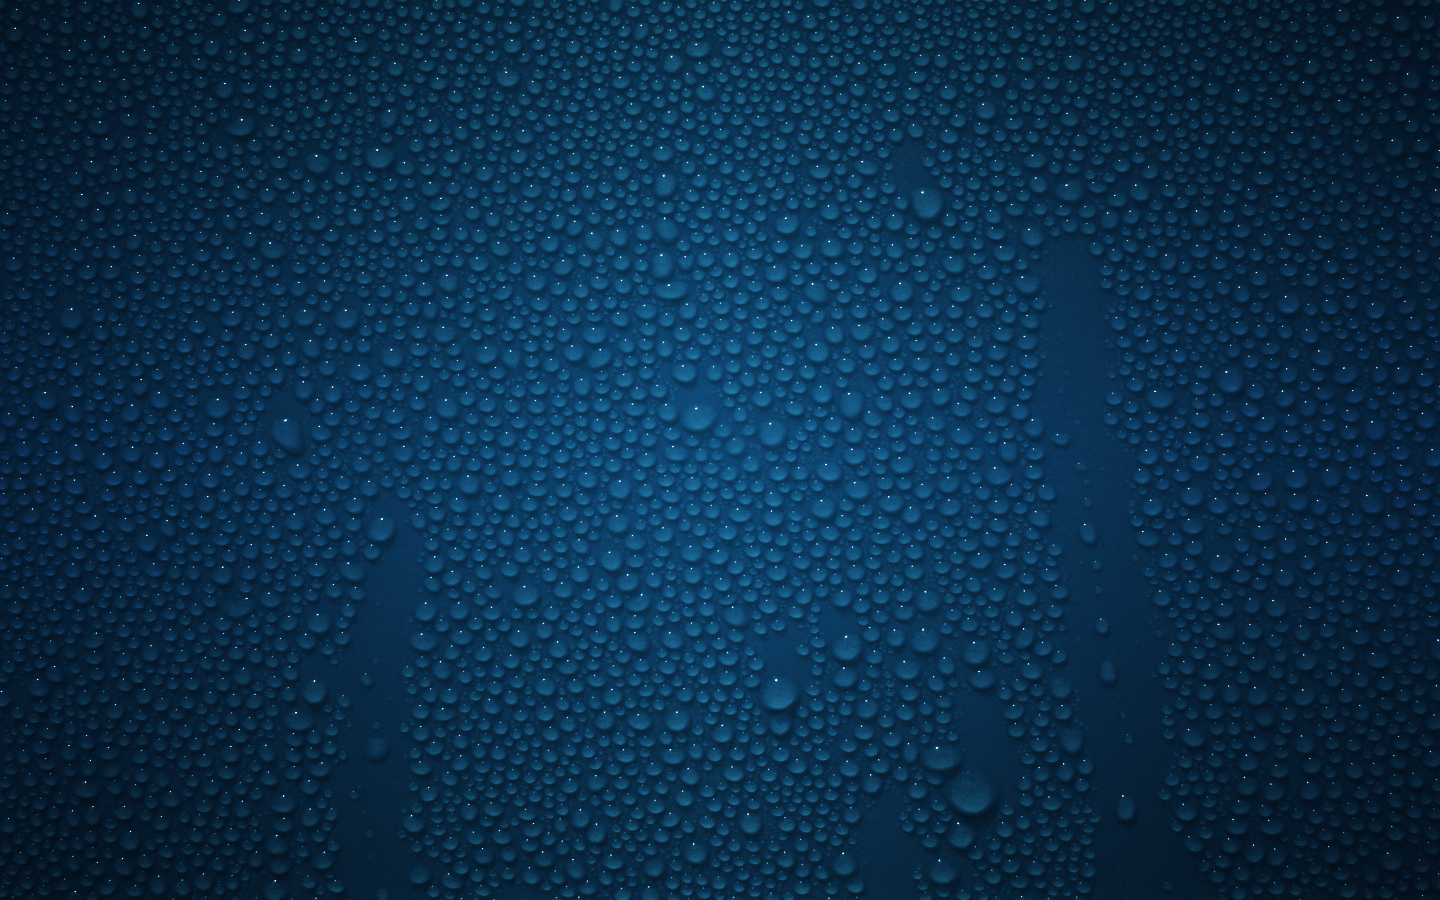 Water Drops Background Images amp Pictures   Becuo